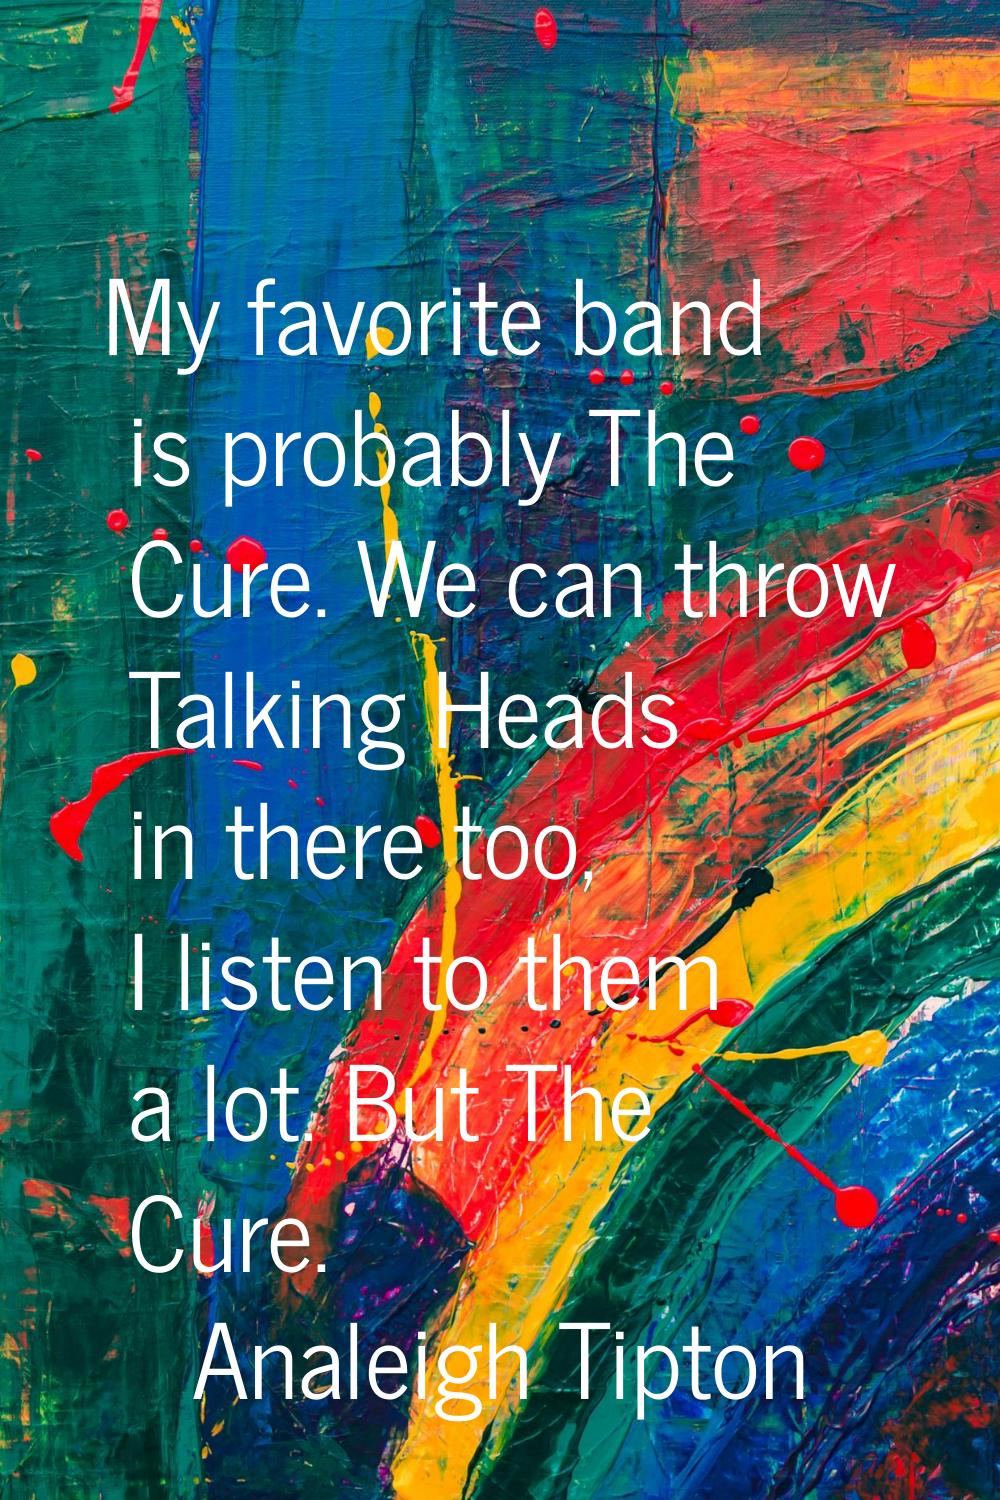 My favorite band is probably The Cure. We can throw Talking Heads in there too, I listen to them a 